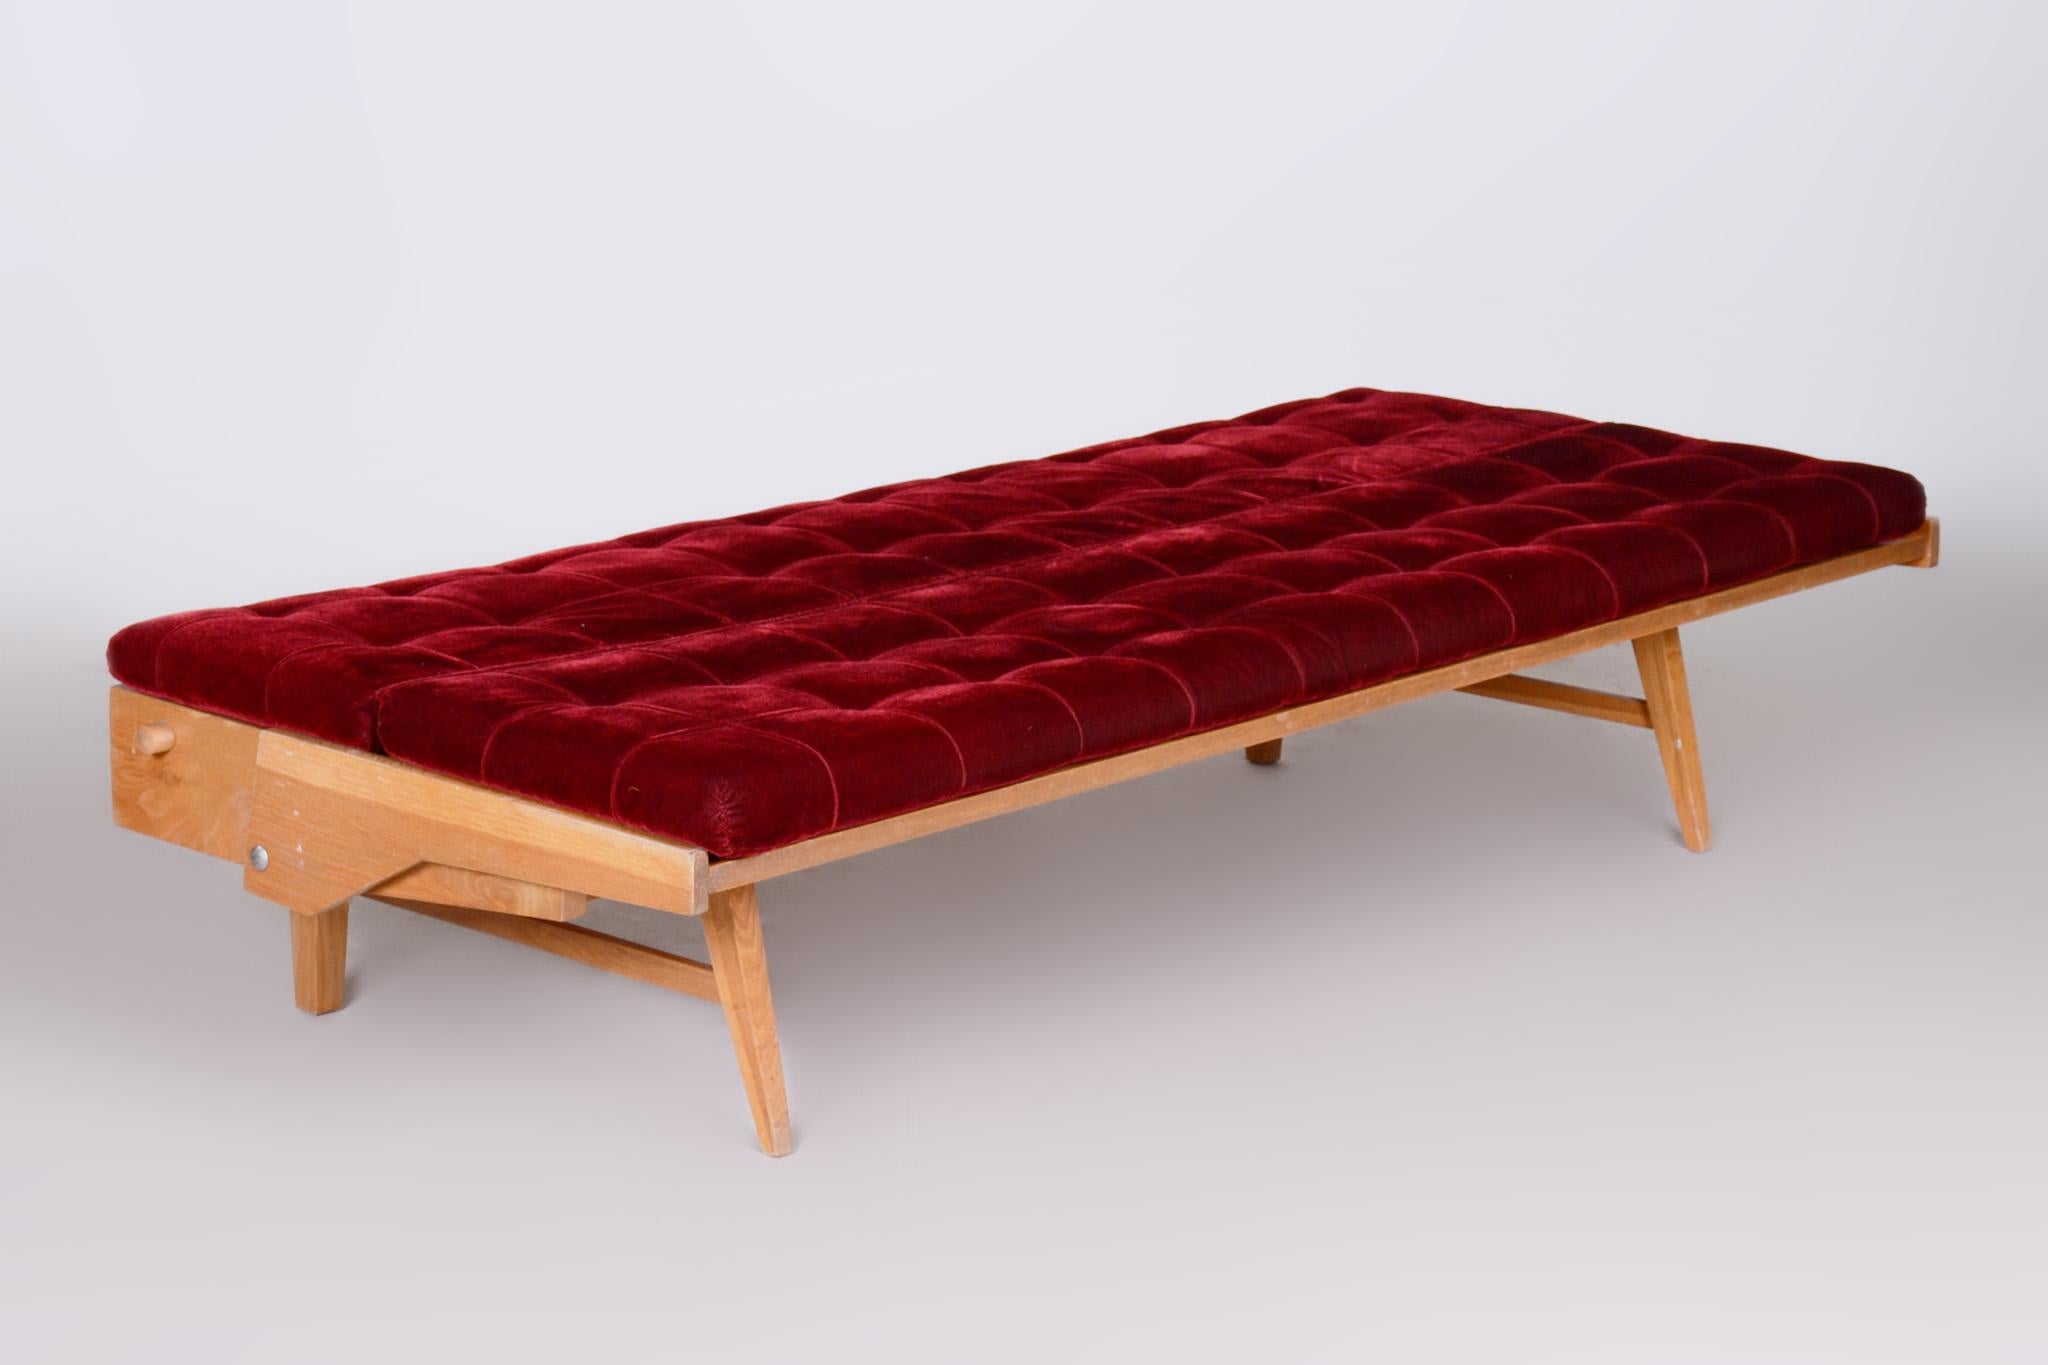 Red Mid-Century Modern Oak Sofa, 1950s, Original Well Preserved Upholstery For Sale 3